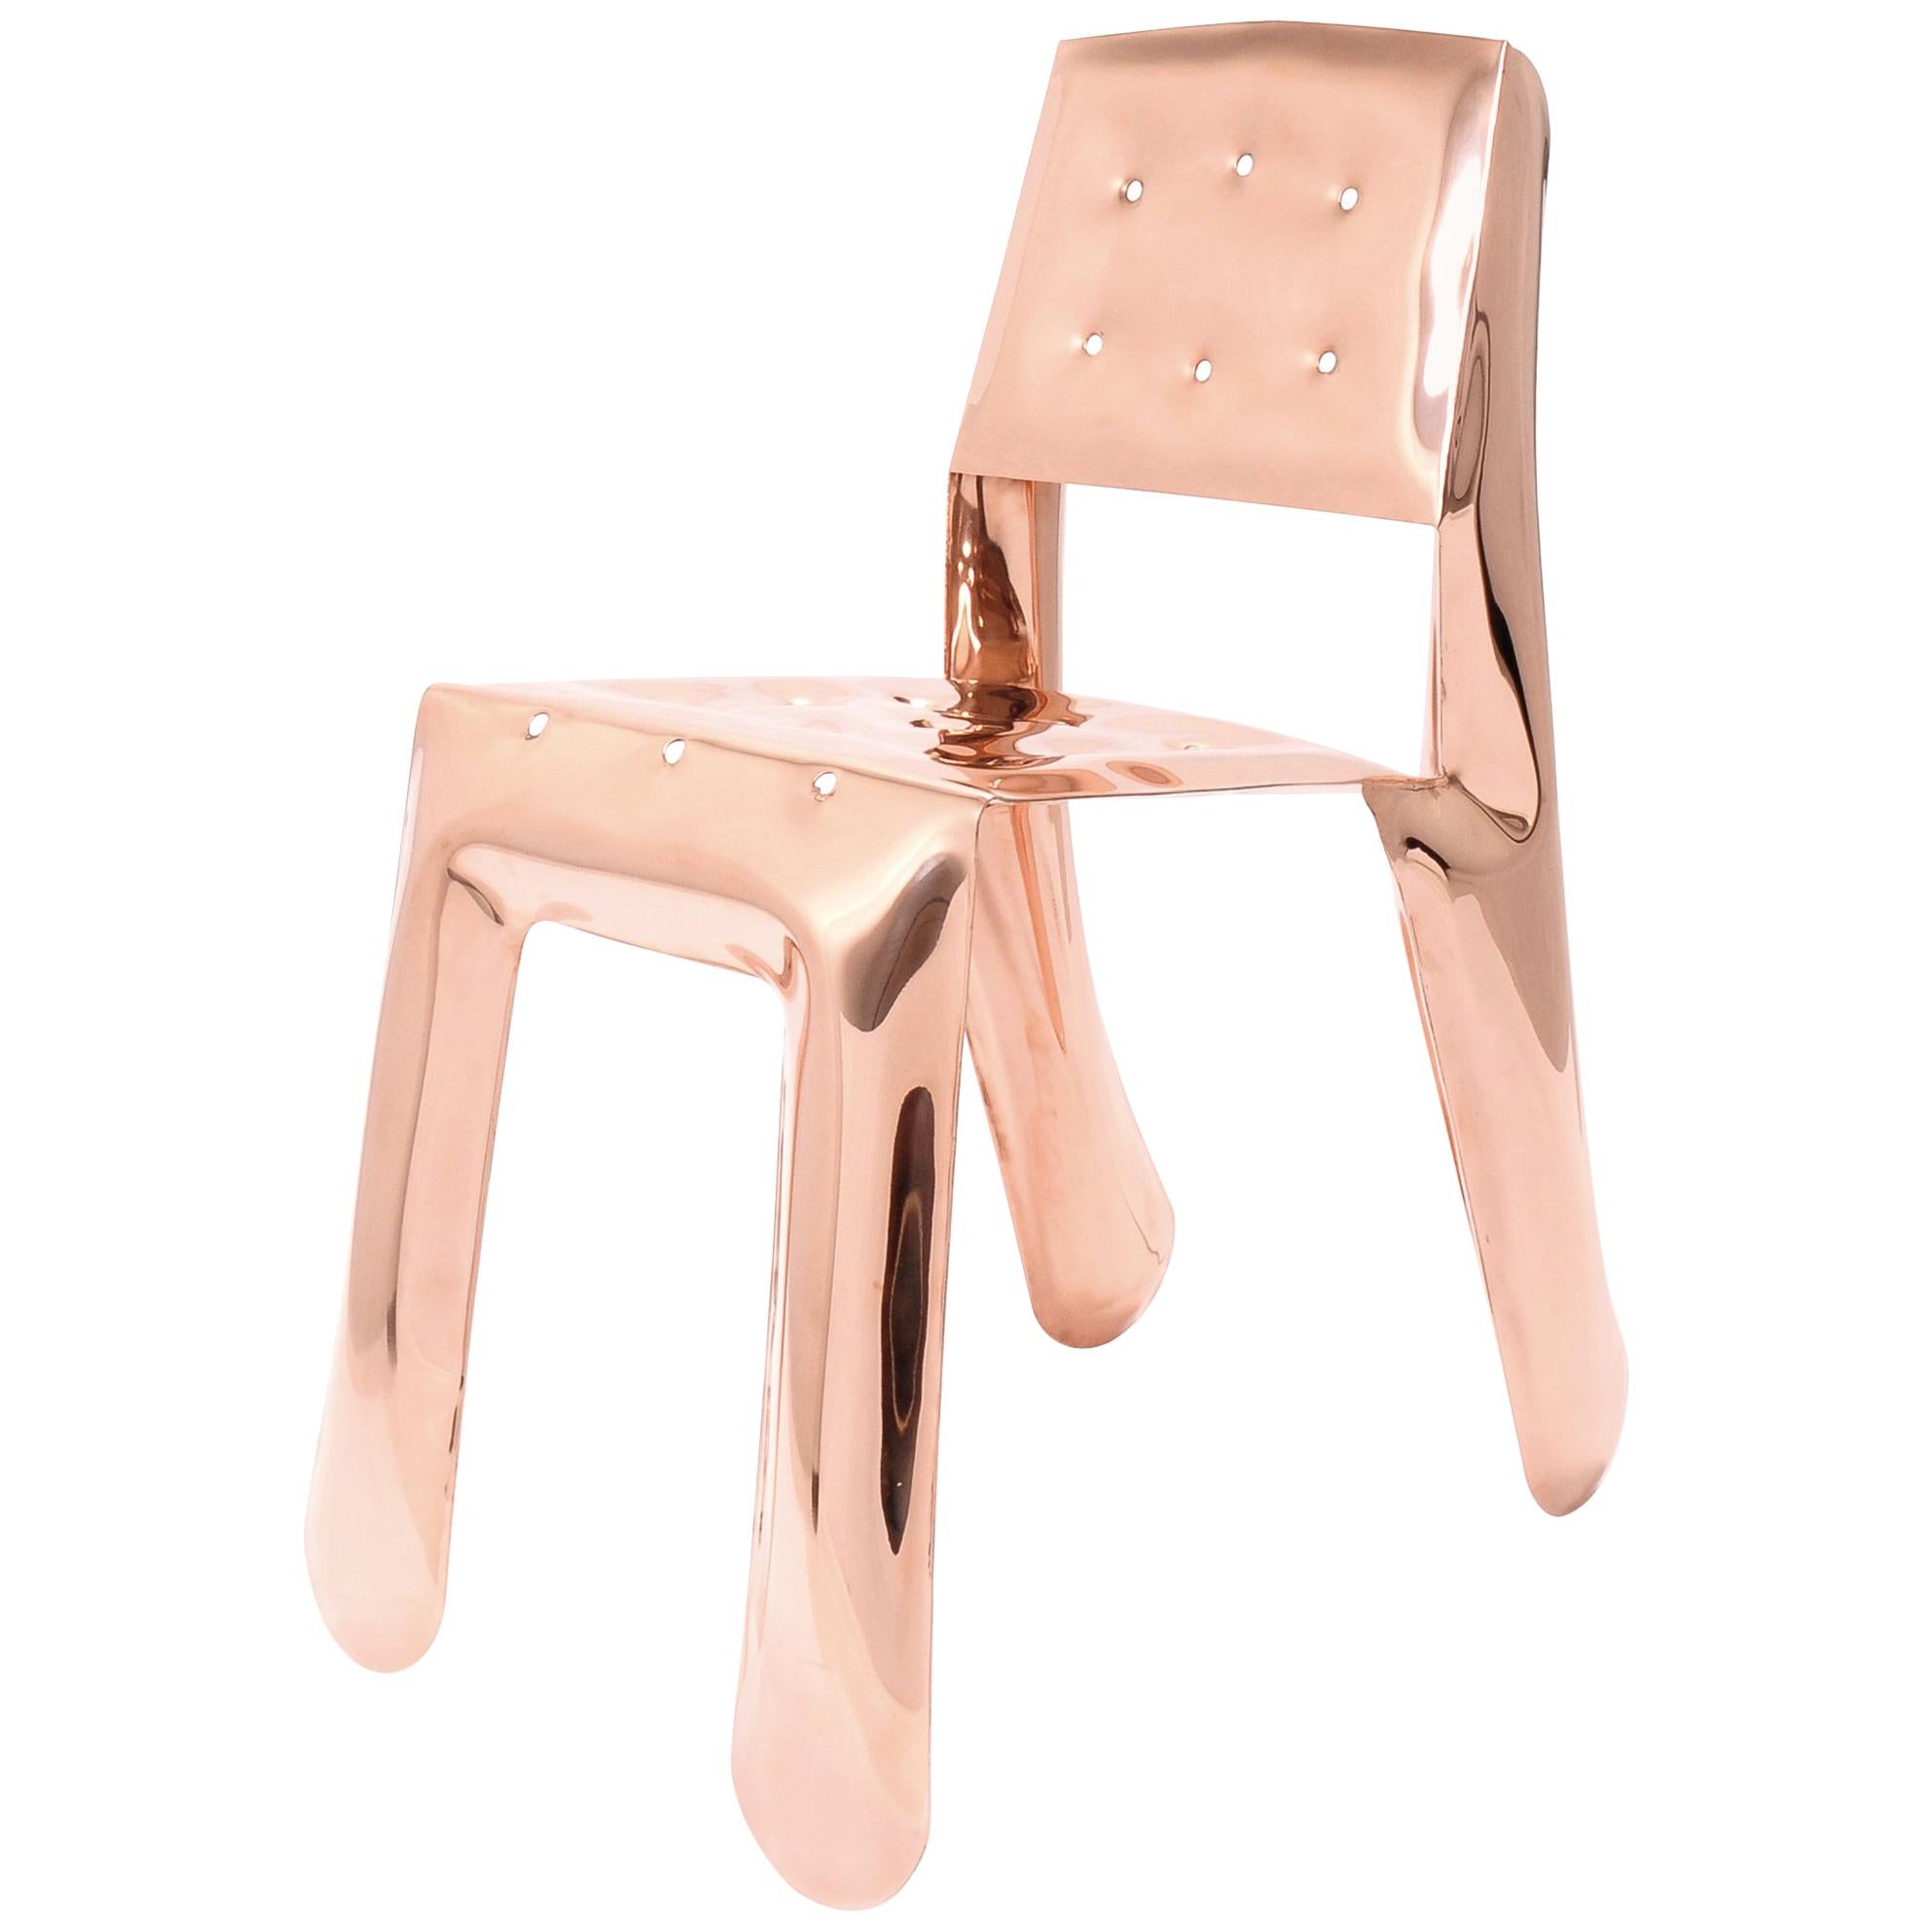 Limited Edition Chippensteel 0.5 Chair in Lacquered Copper by Zieta For Sale